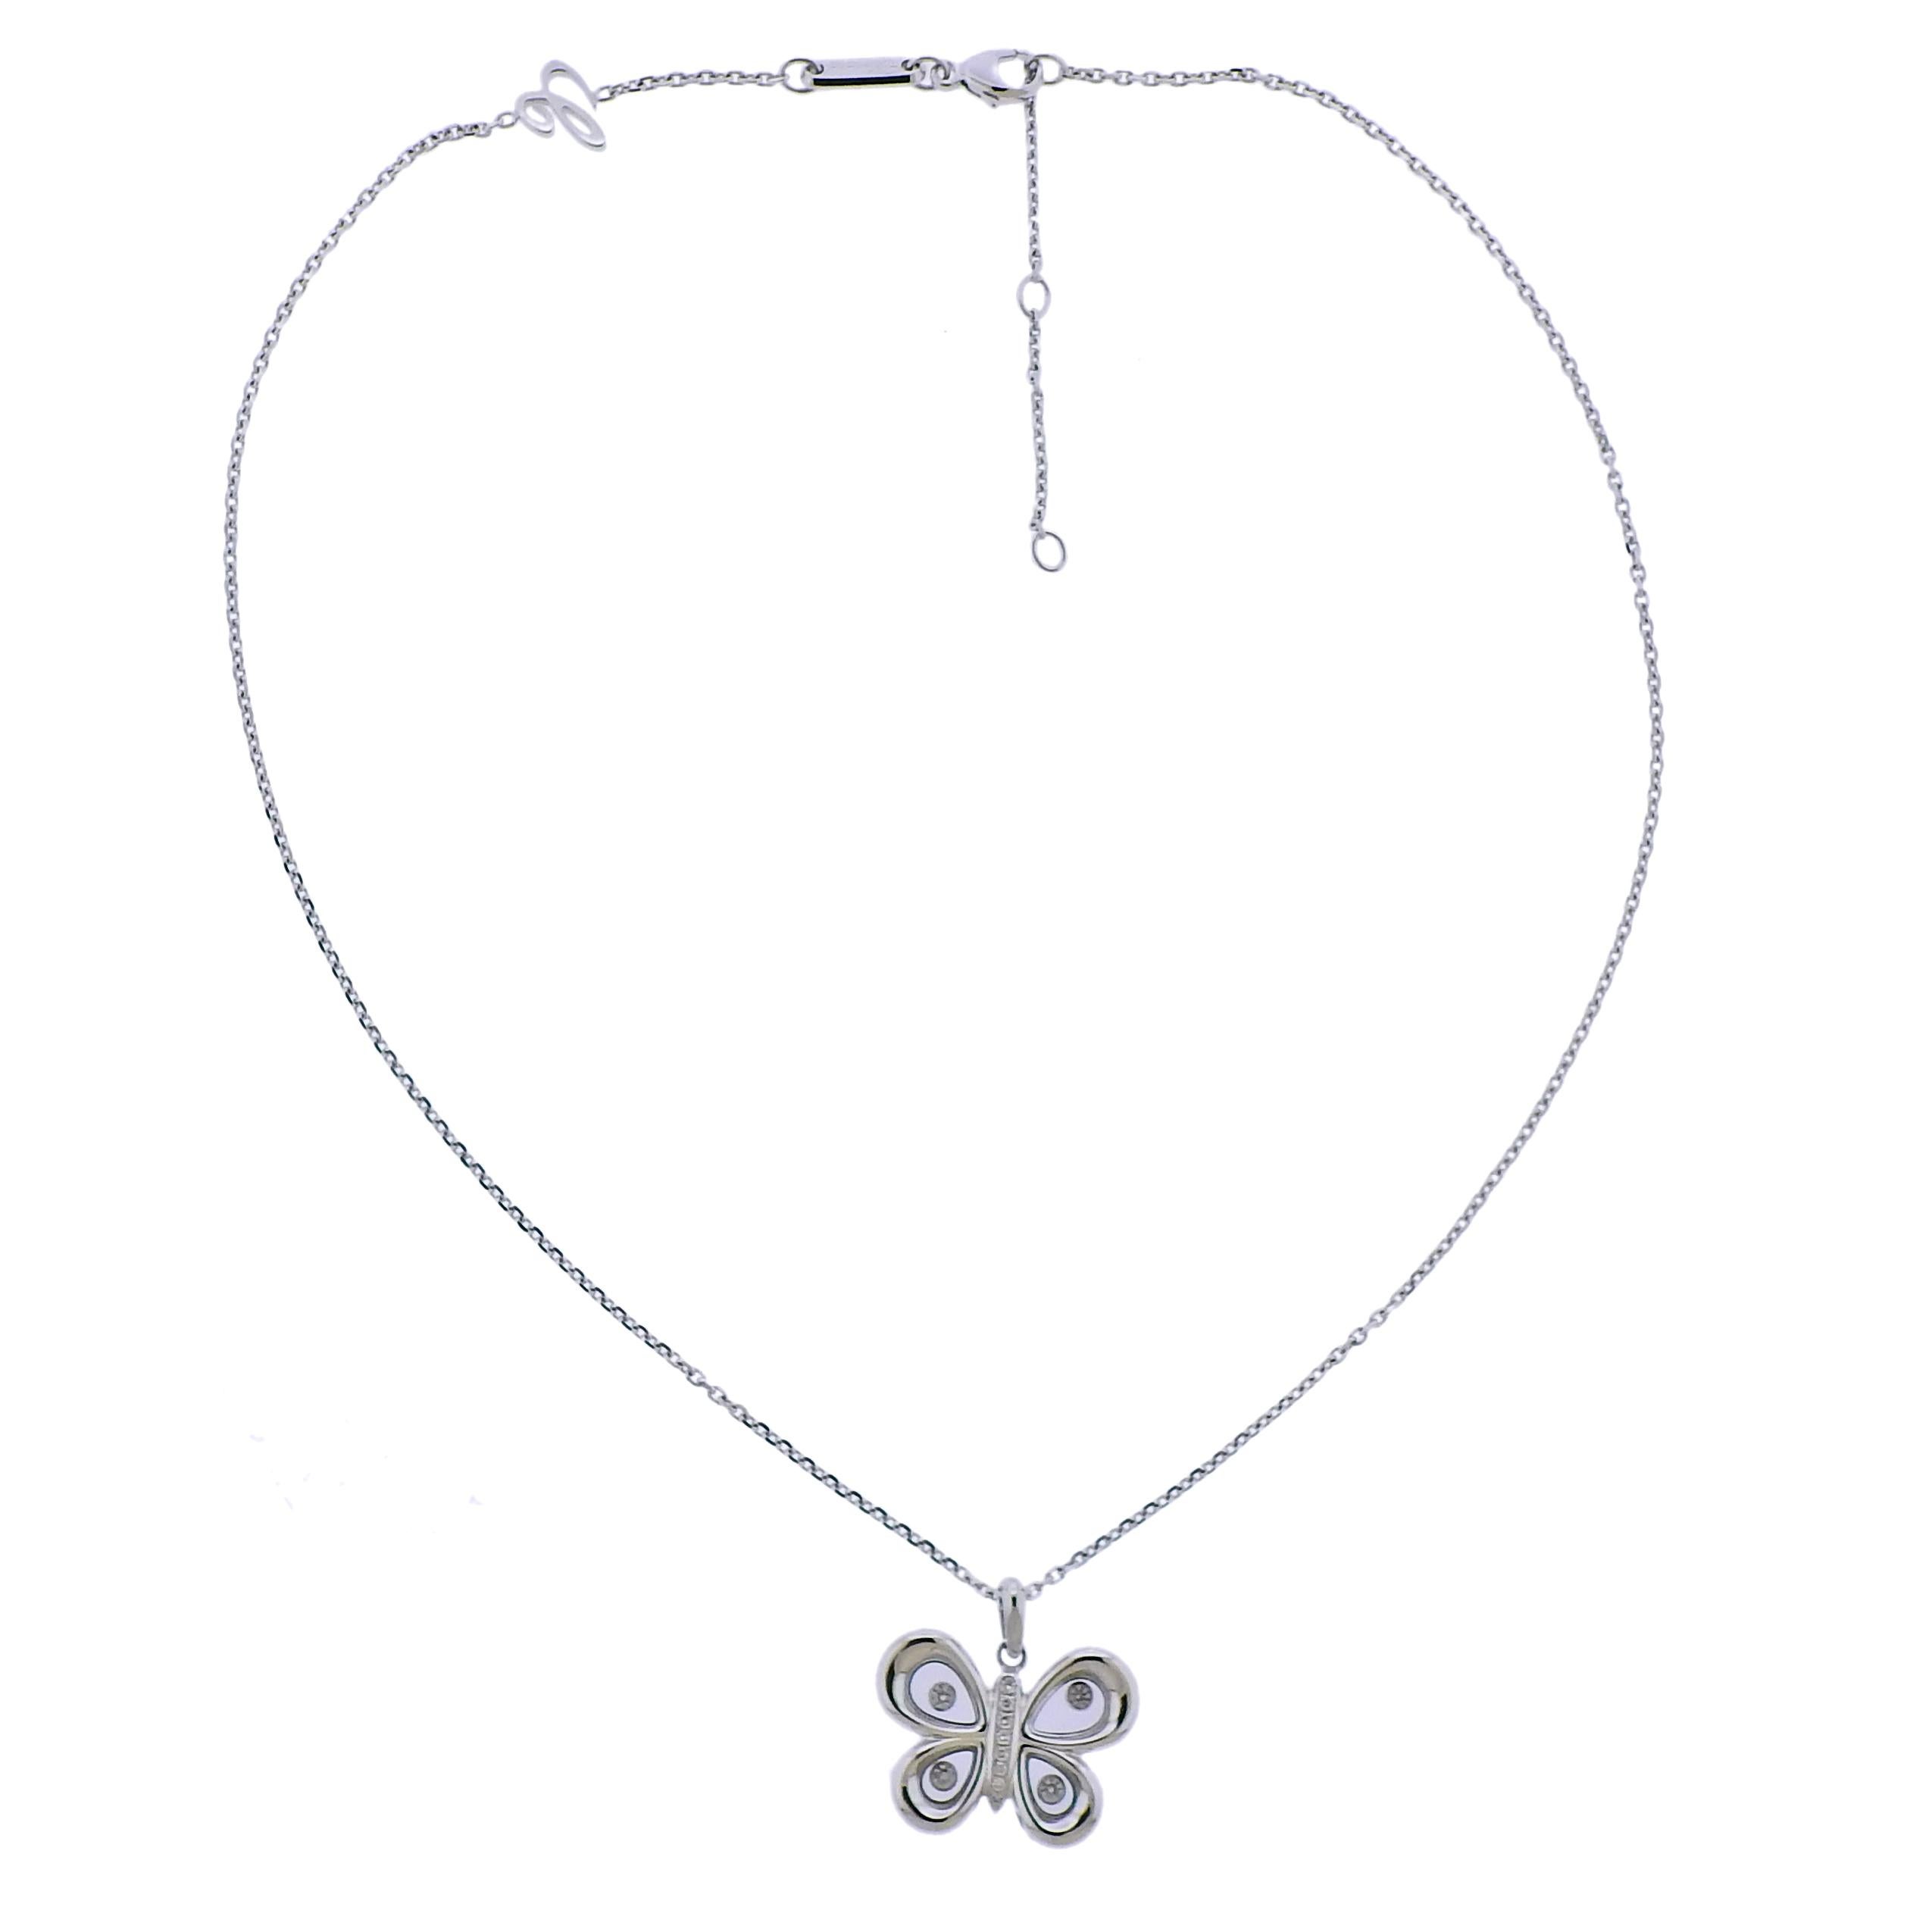 New 18k white gold Happy Butterflies necklace by Chopard, with approx. 0.12ctw in GH/VVS diamonds.  Retail $6650, with box and papers.  Necklace is 16.5